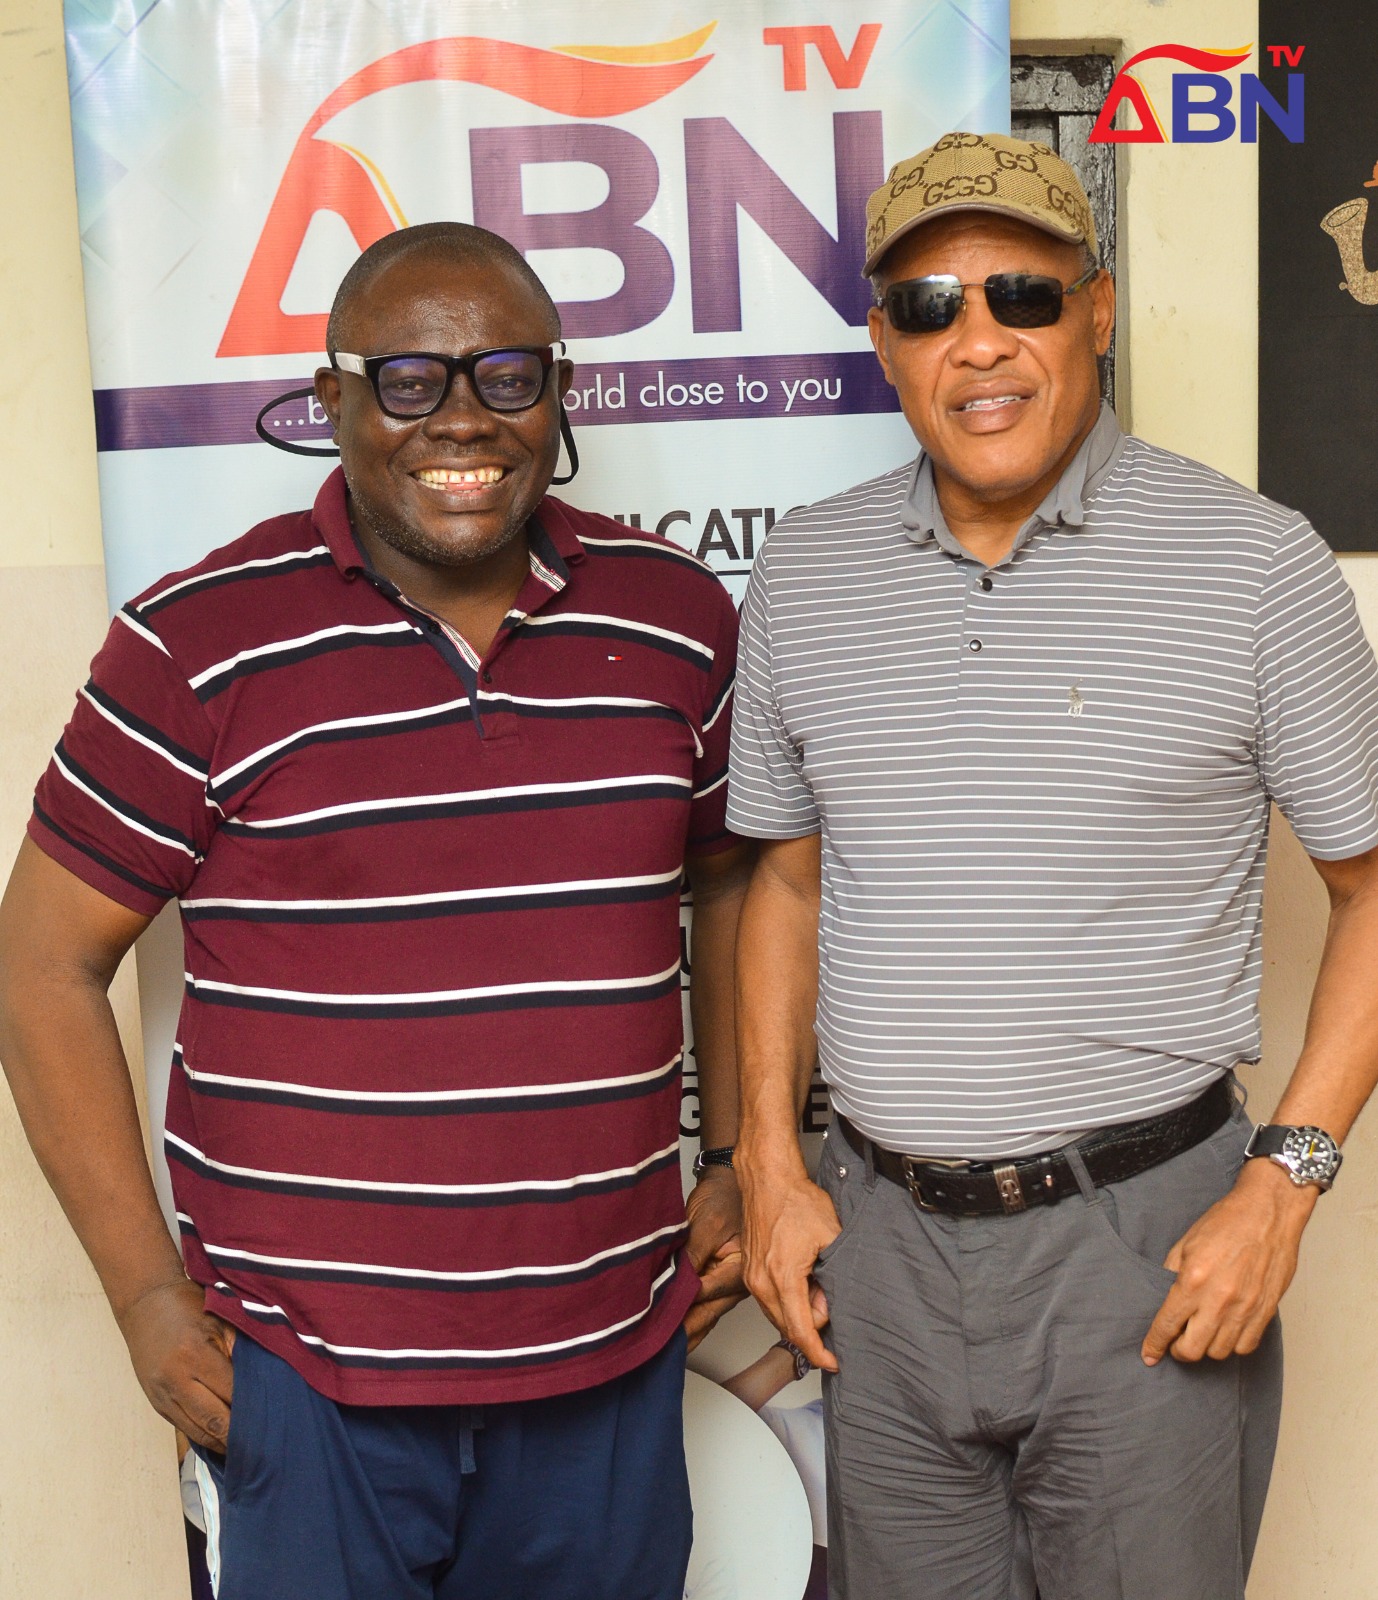 Rep. Obi Aguocha Storms ABN TV Office In Solidarity Visit, Frowns At Police Invasion (Photos, Video)